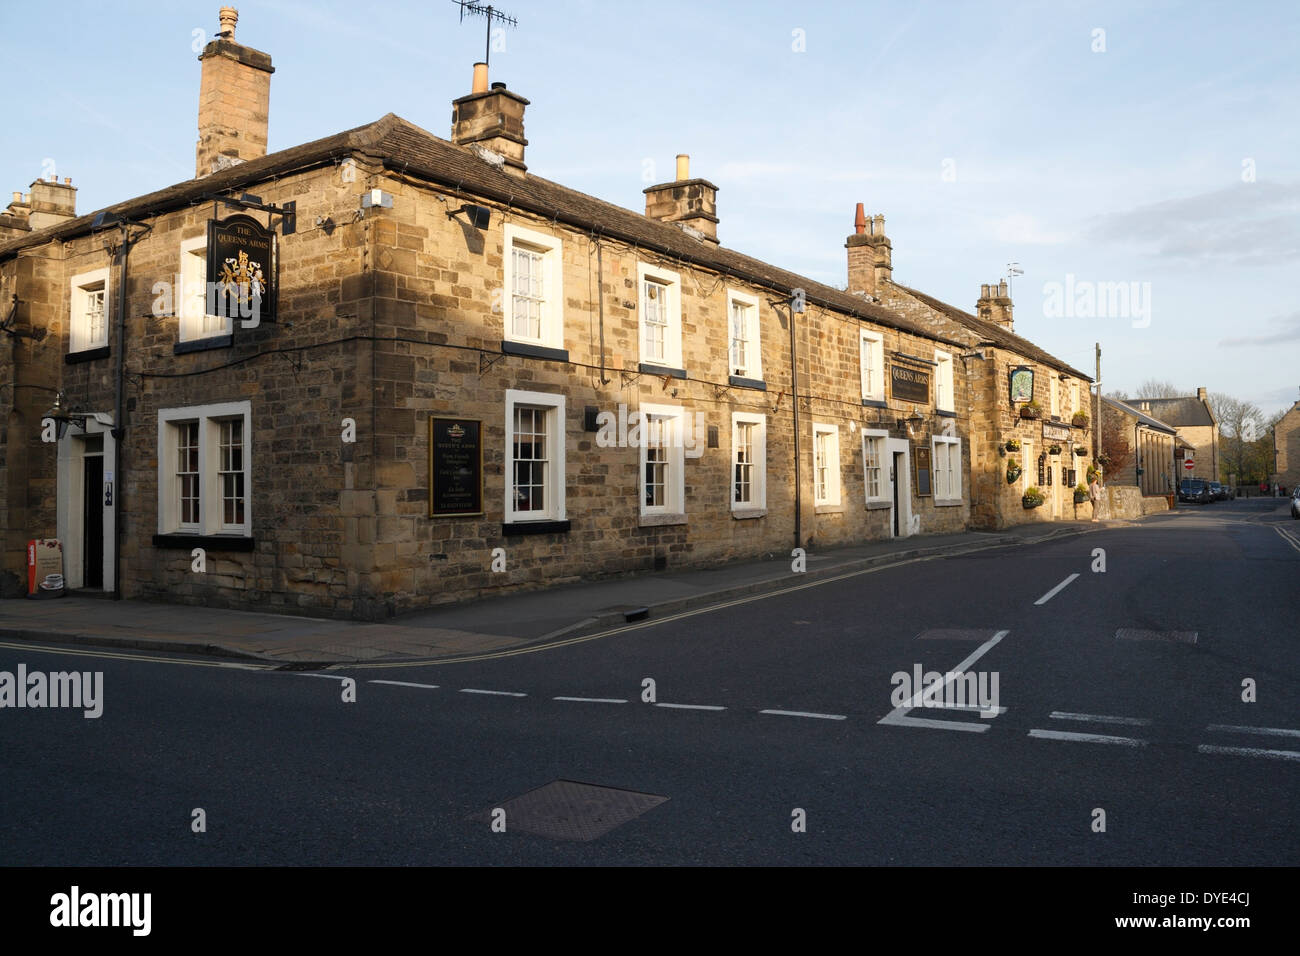 The Queens Arms and the Peacock Inn Public Houses in Bakewell Derbyshire Stock Photo